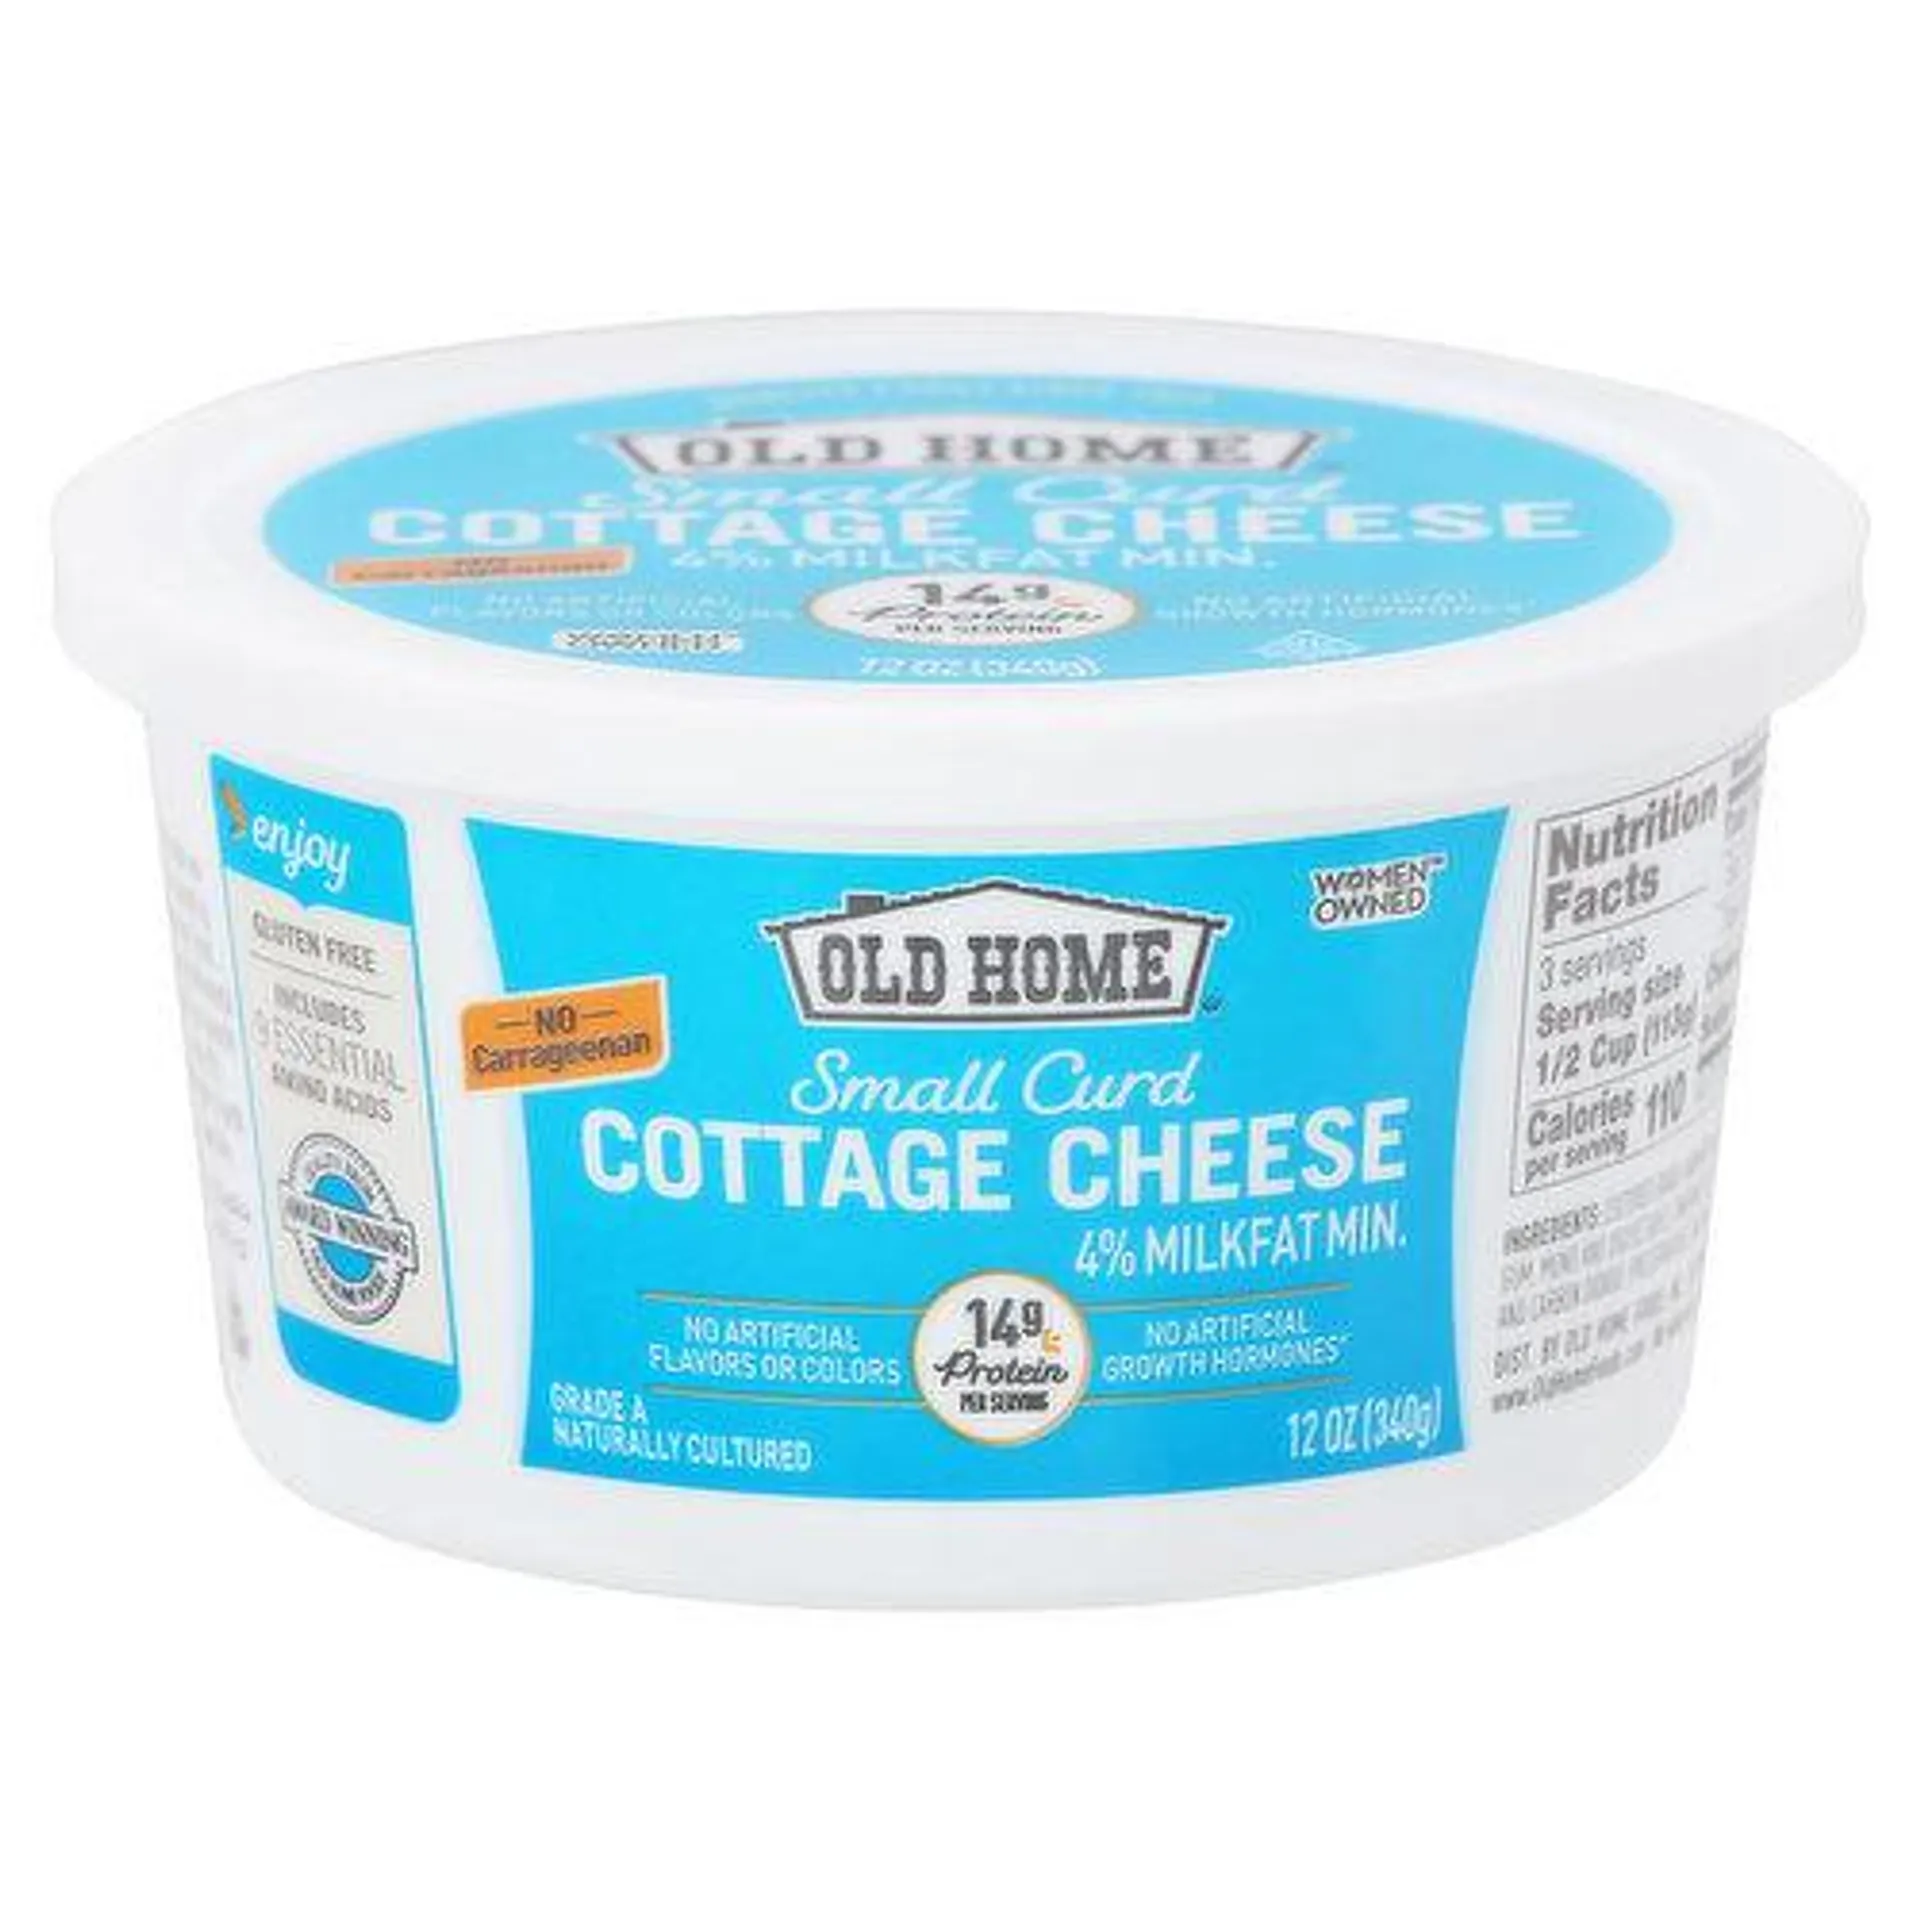 Old Home Cottage Cheese, 4% Milkfat Minimum. Small Curd, 12 Ounce